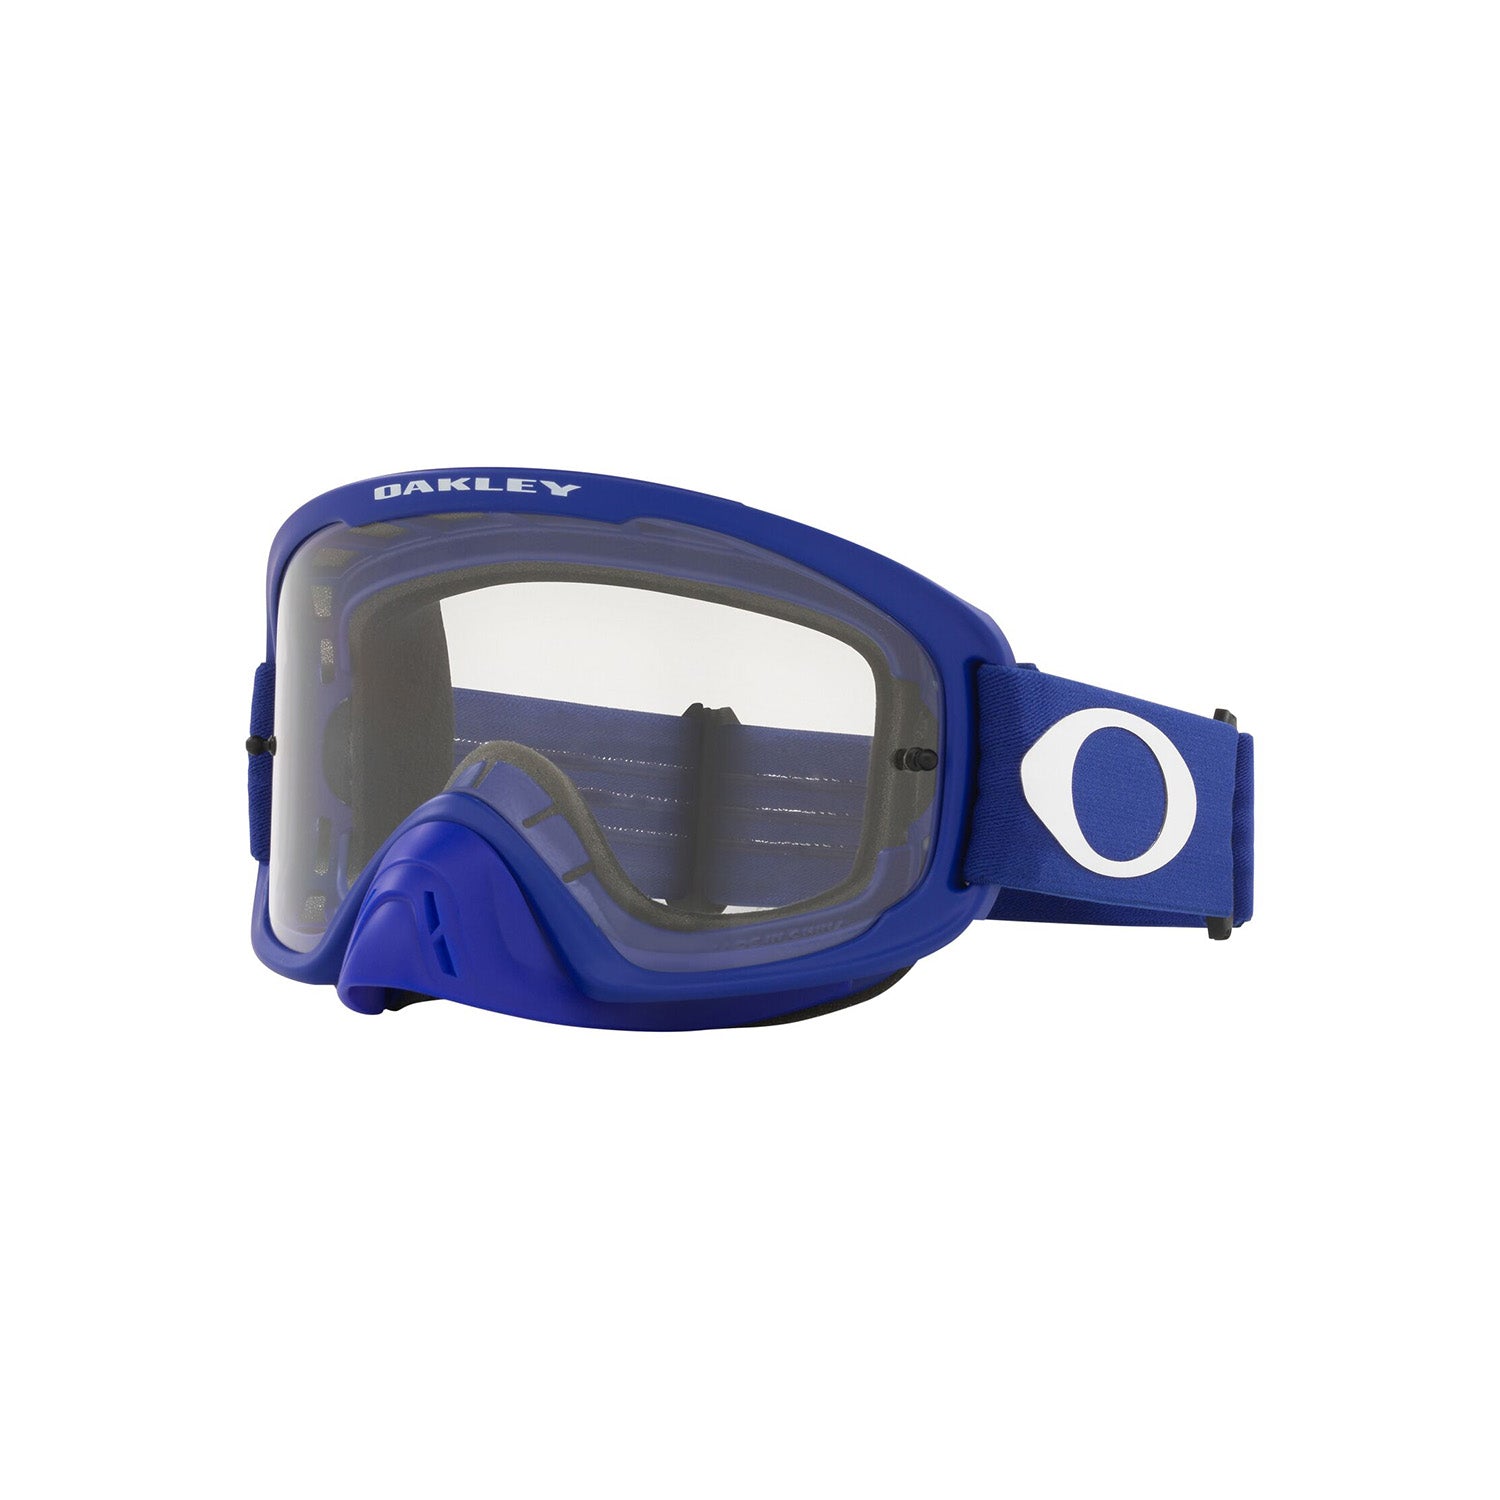 Oakley O Frame 2.0 Pro MX Goggle in Moto Blue with Clear Lens